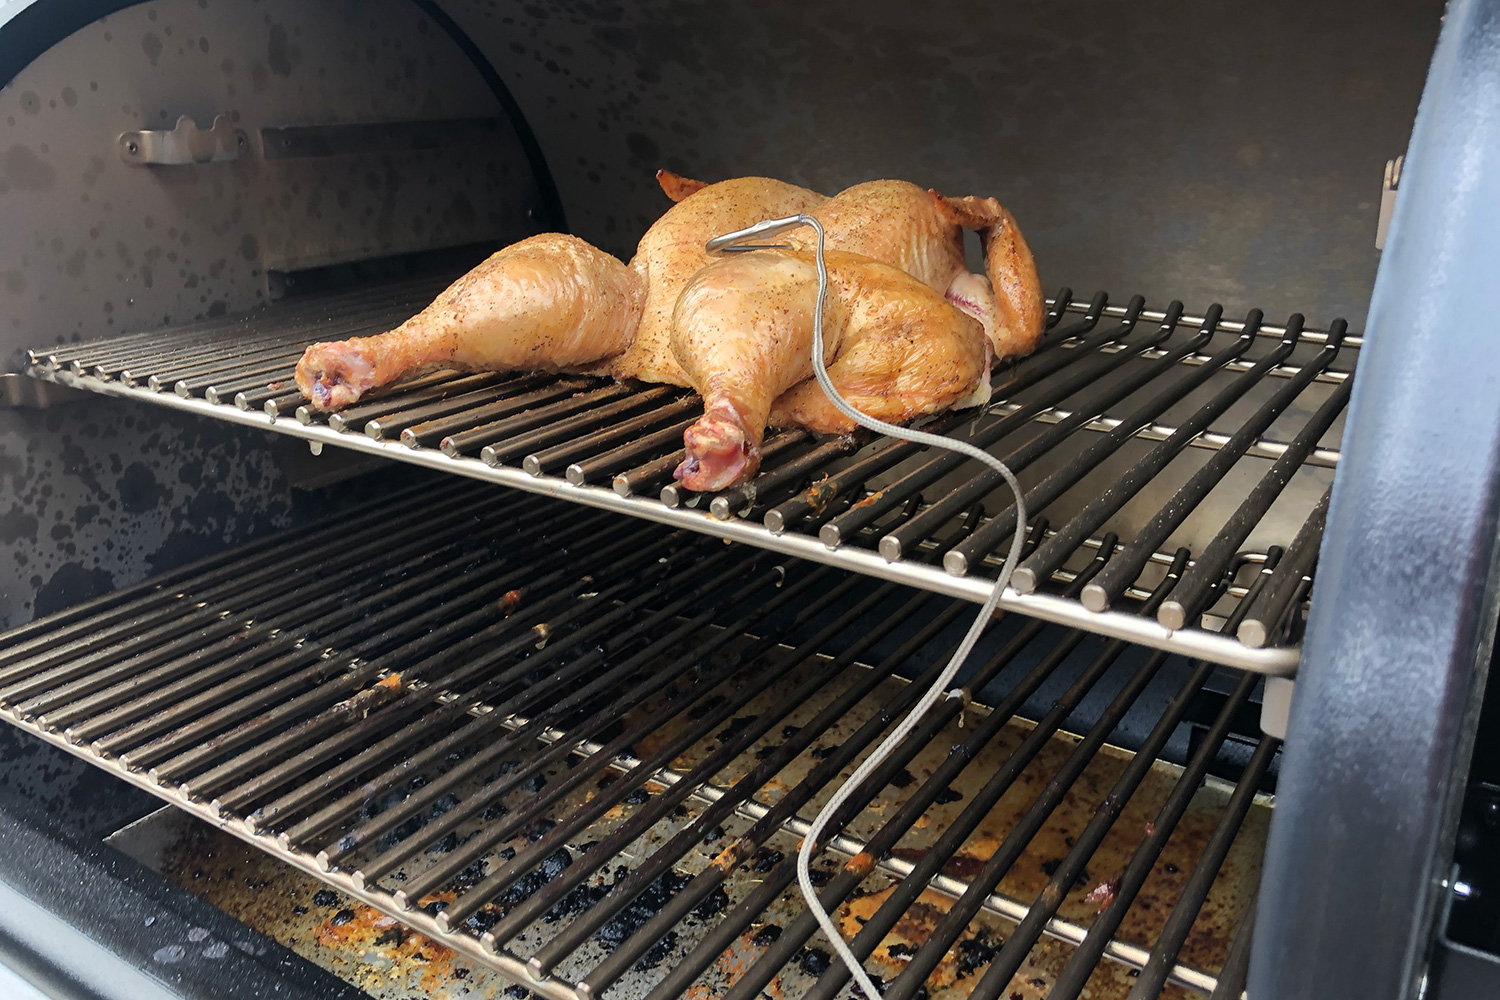 New Traeger Timberline Pellet Grill Review 2022: Is Smoker Worth It?